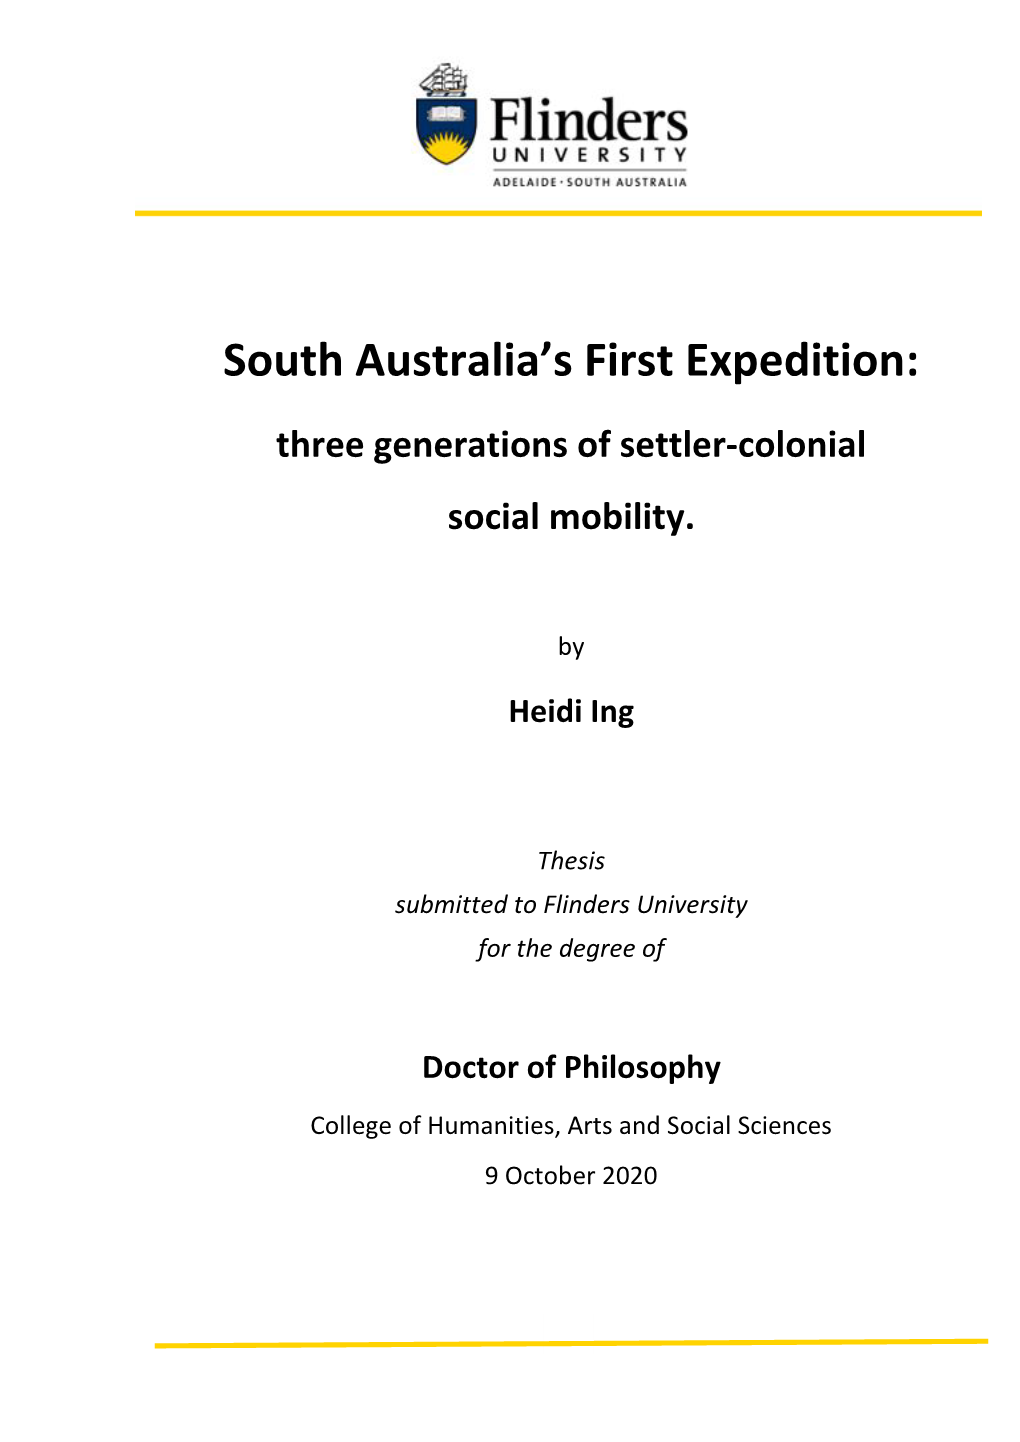 South Australia's First Expedition